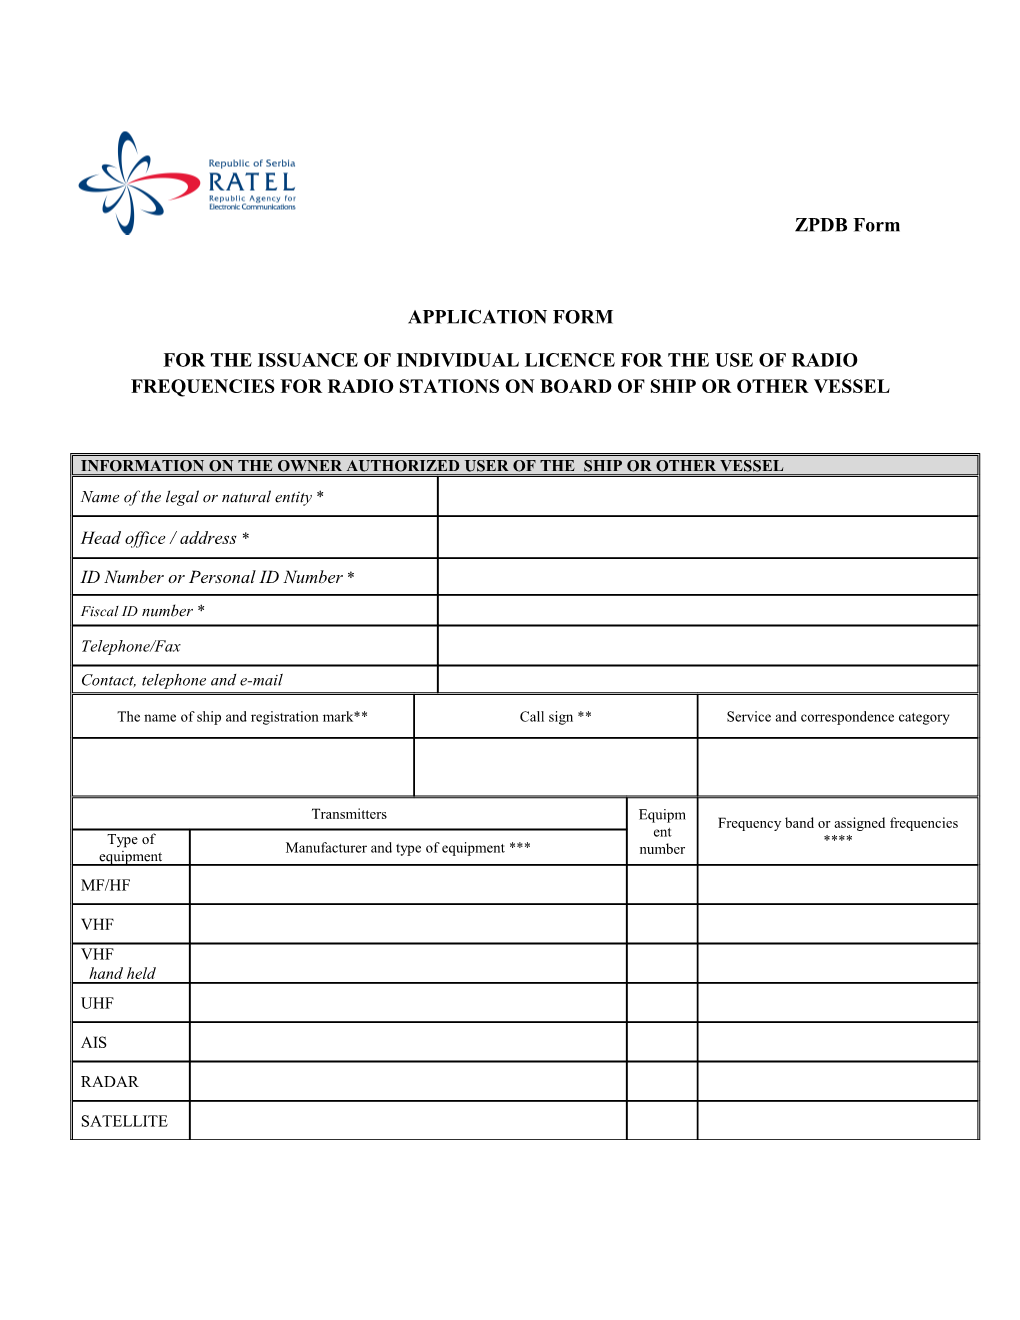 Application Form s20